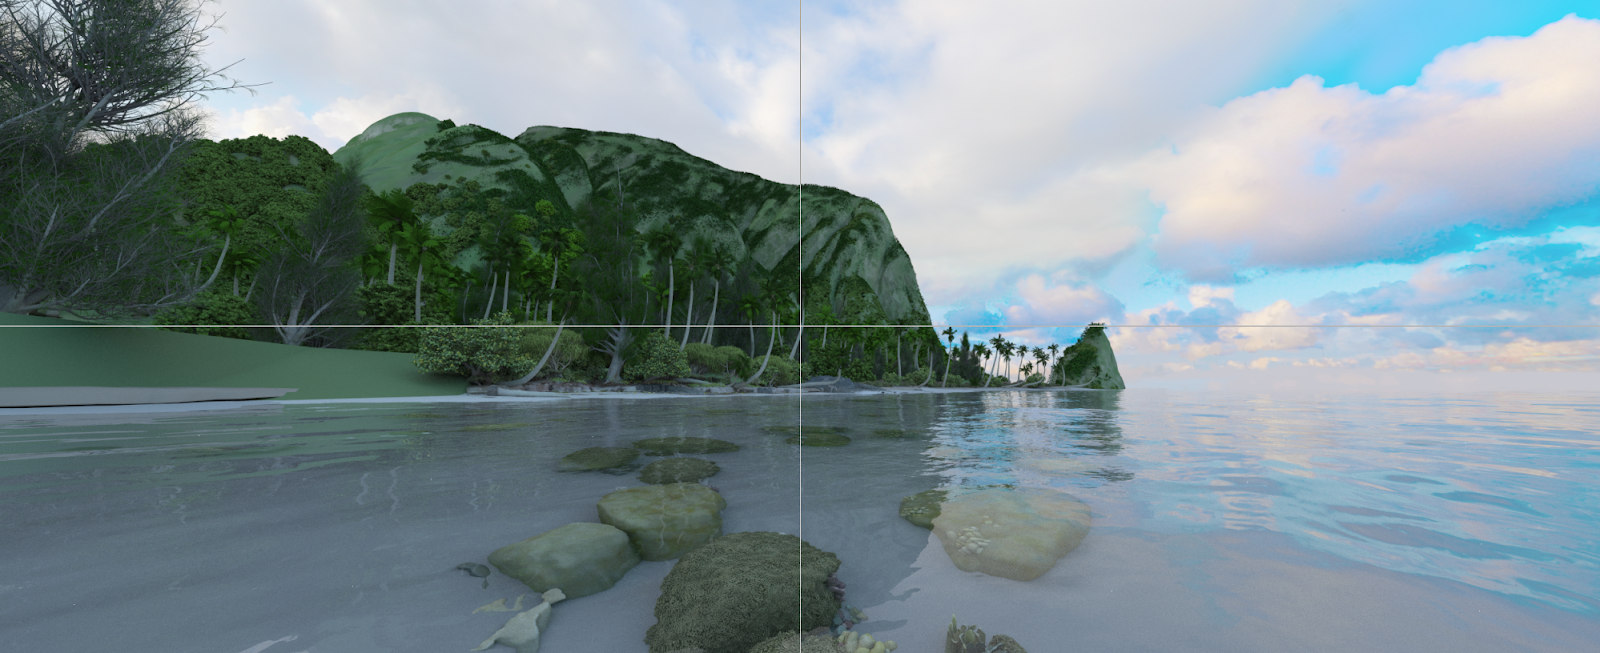 3D graphic of a shore next to a body of water, with trees in the background.